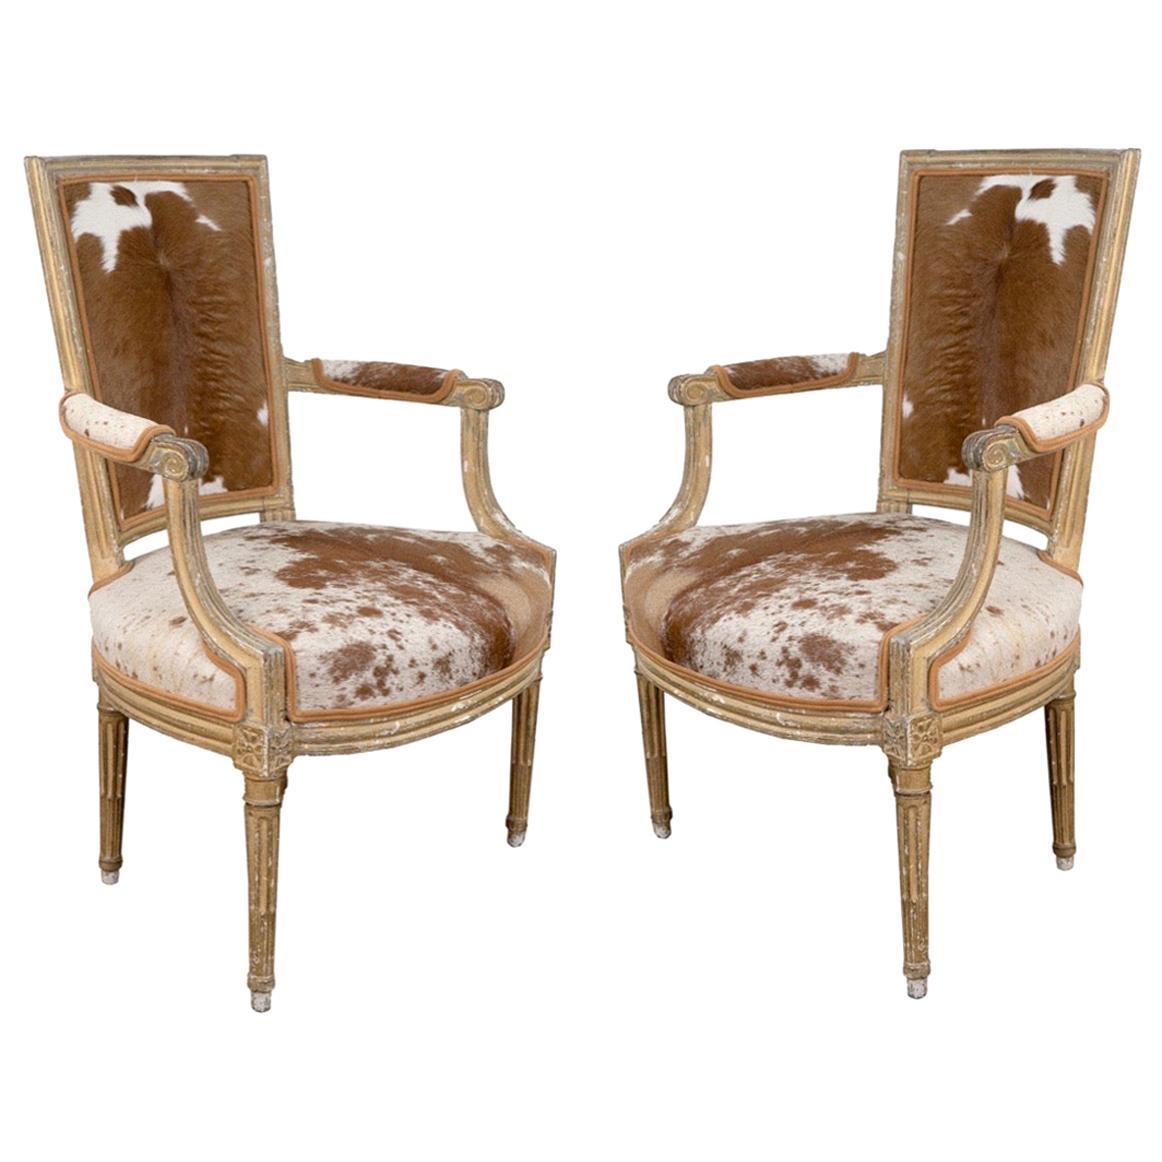 Pair of Louis XVI Style Hide Upholstered Fauteuils